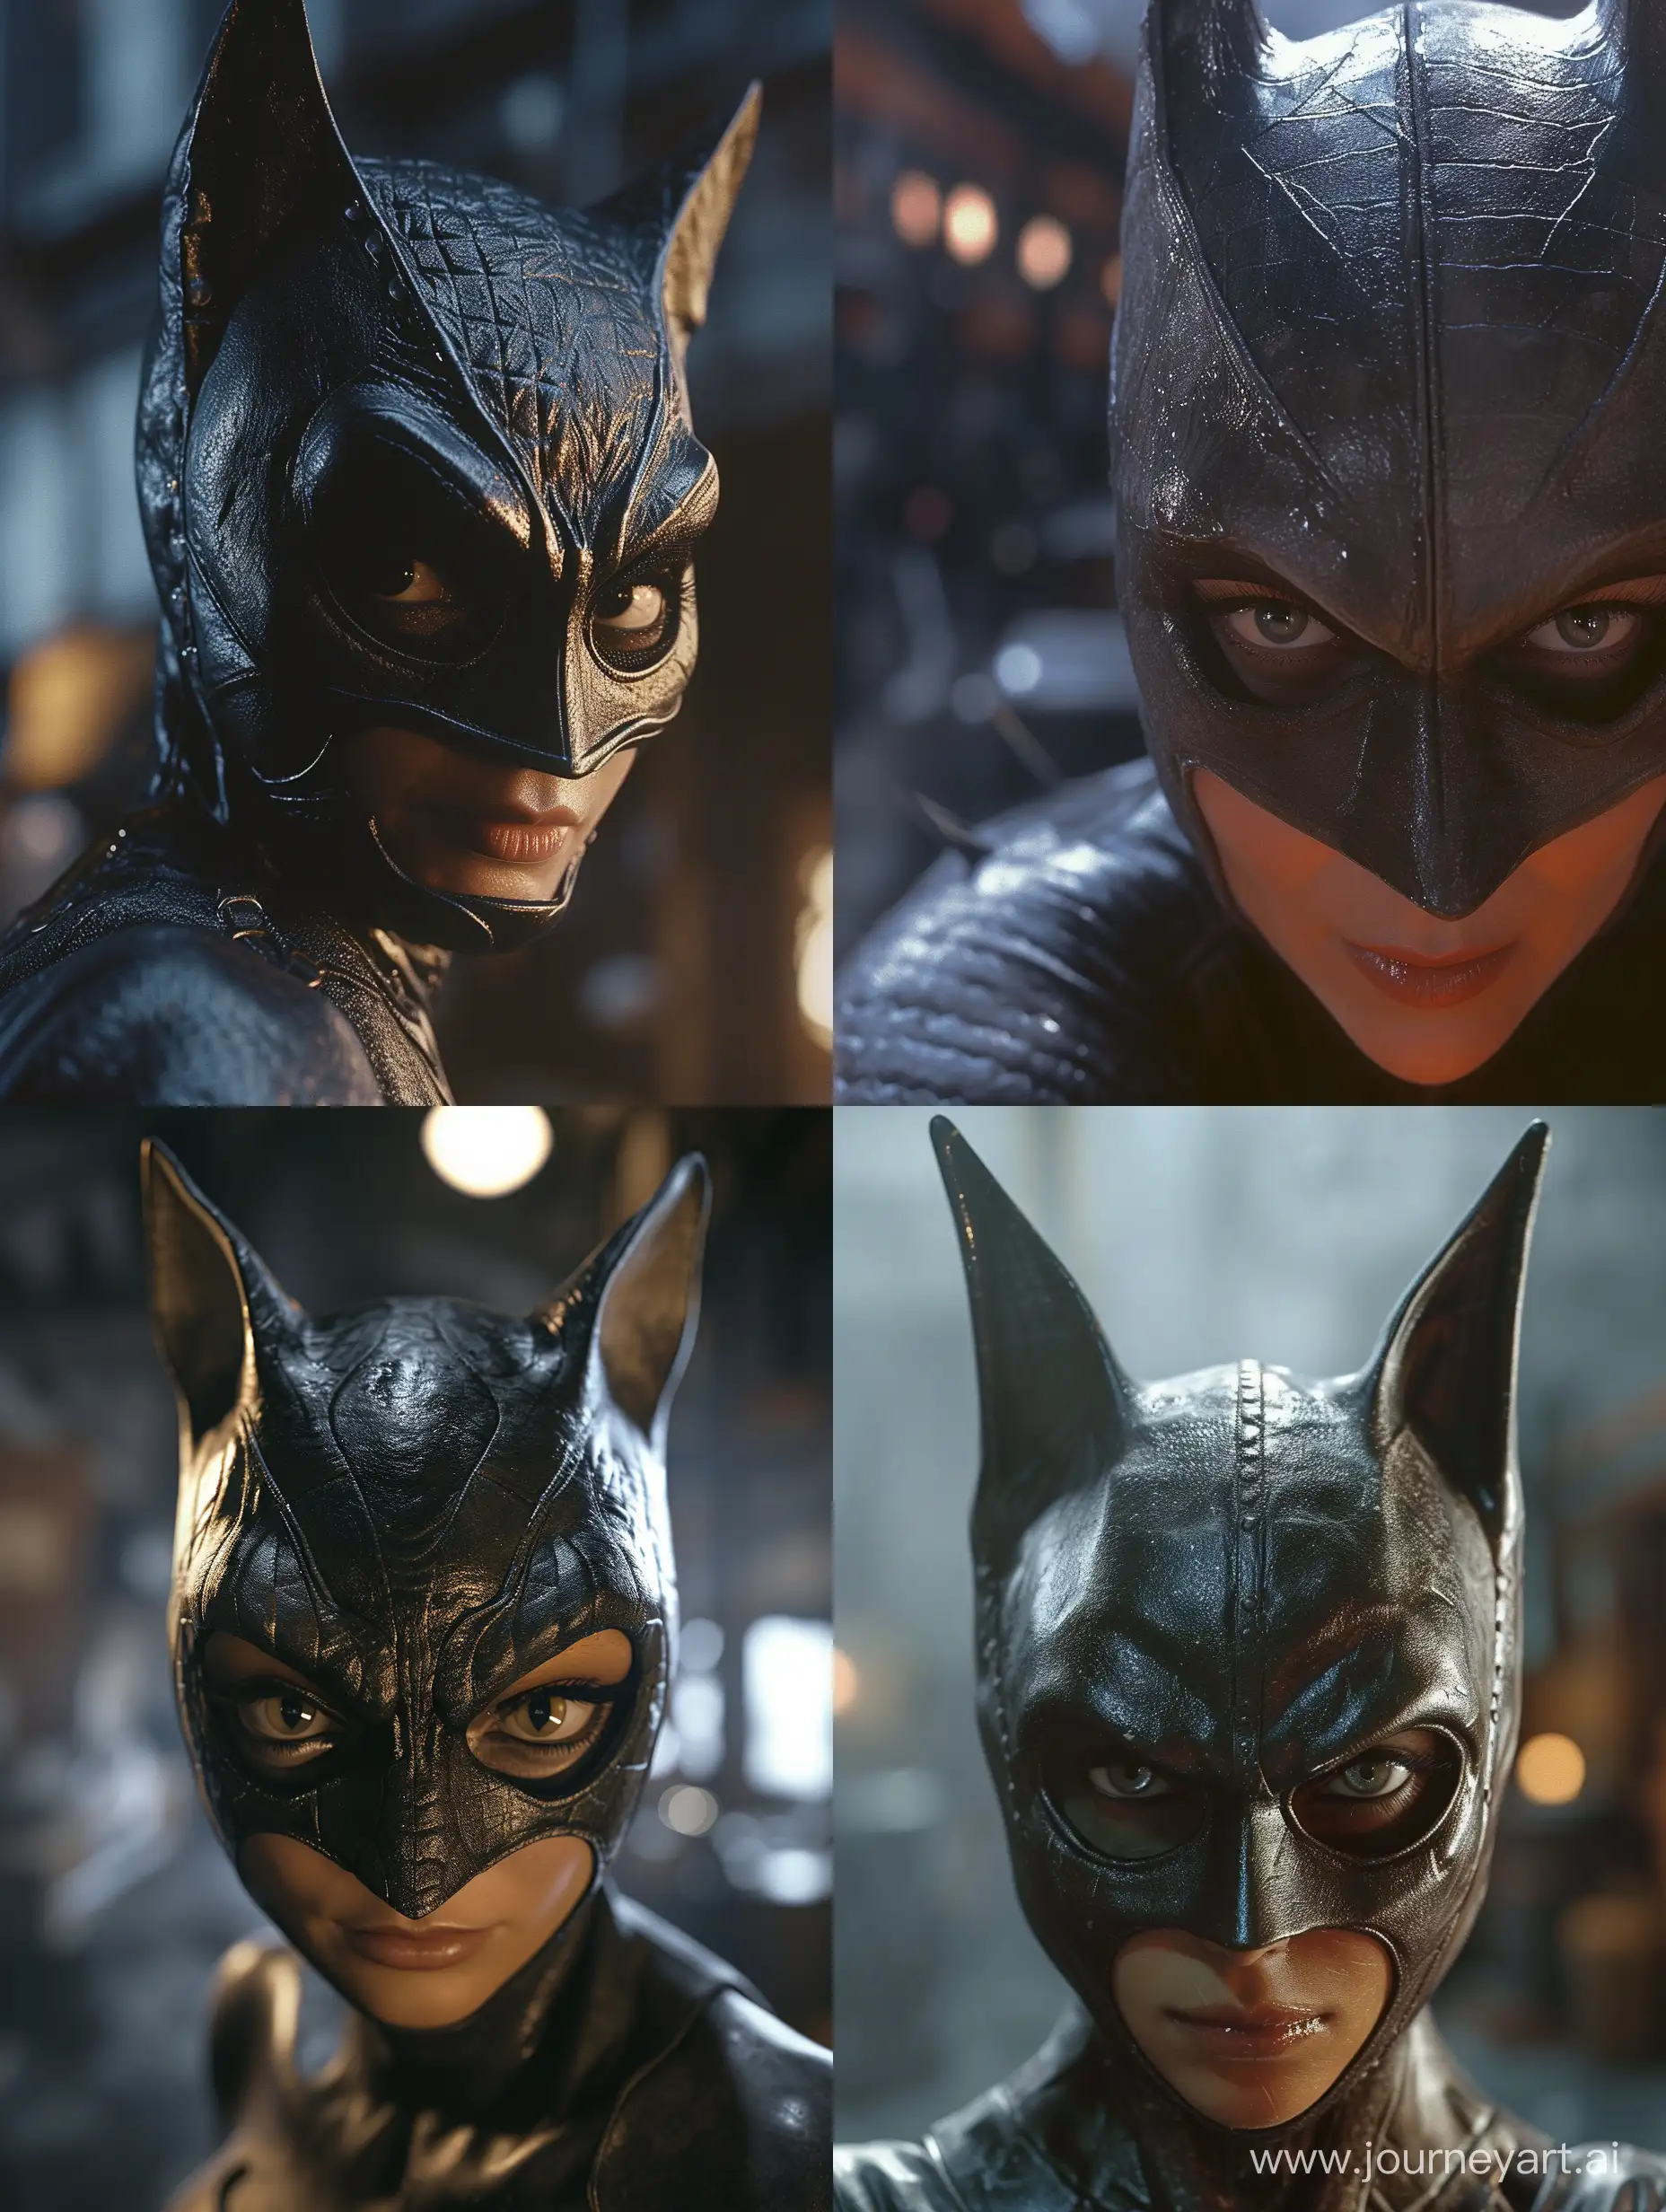 a close-up of  realistic catwoman 1989 costume,  the opening for the eyes and lower part of the face. The character's expression is serious or stern, consistent with the typical portrayal of Batman as a determined and intense superhero. The costume appears to be made of a material that mimics the texture of leather,  readiness to face danger. The lighting is dim, suggesting a dark or nighttime setting, which is characteristic of the Gotham City environment where catwoman often operates. The background is blurred and not clearly discernible, but it seems to be a gloomy and possibly industrial setting, adding to the overall dark and gritty atmosphere often associated with catwoman media.